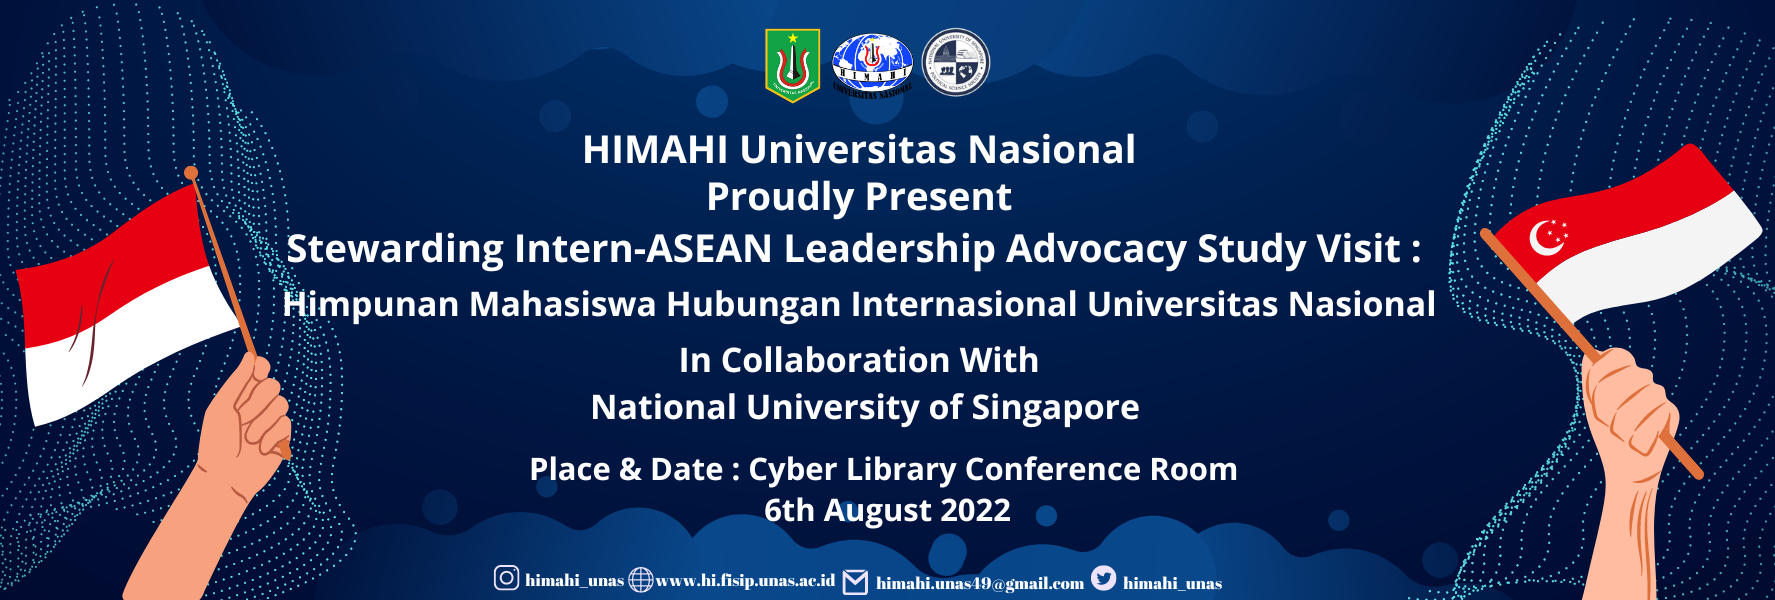 HIMAHI UNAS Collaboration with National University of Singapore Political Science Society : “Stewarding Inter-ASEAN Leadership Advocacy Study Visit”